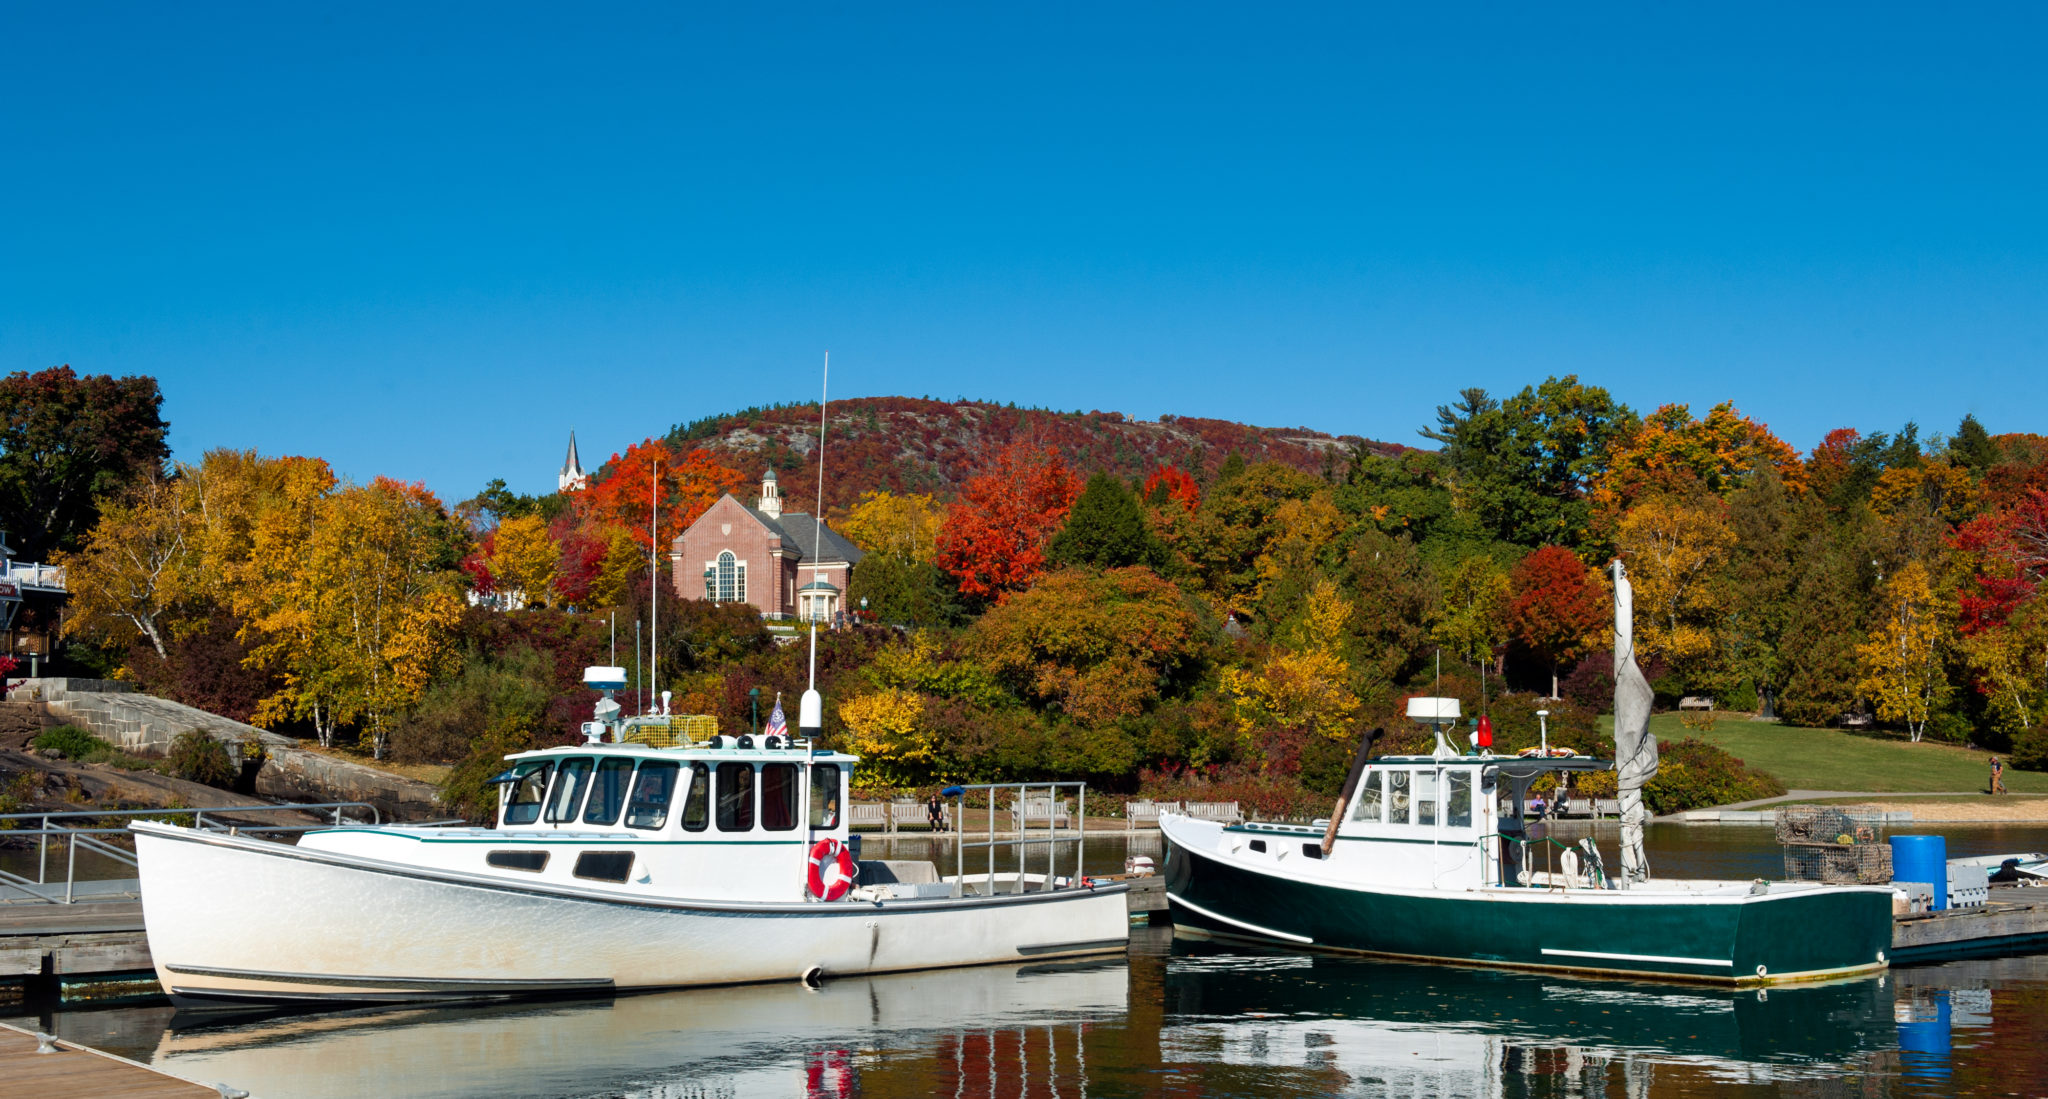 Lobster boats in Camden, Maine Harbor, fall foliage